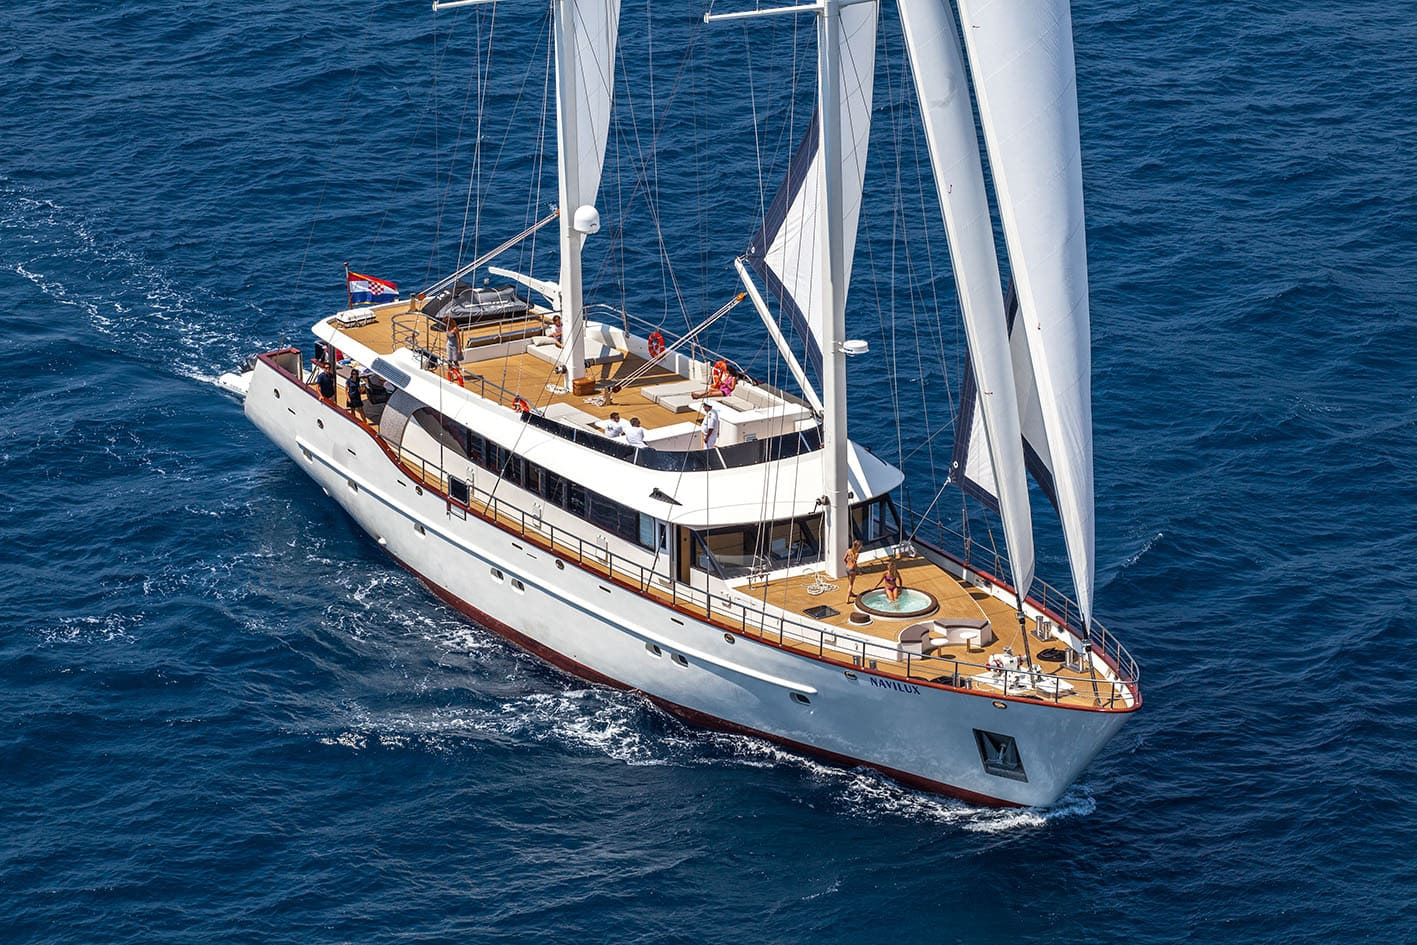 Full view of Navilux sailing yacht at sea